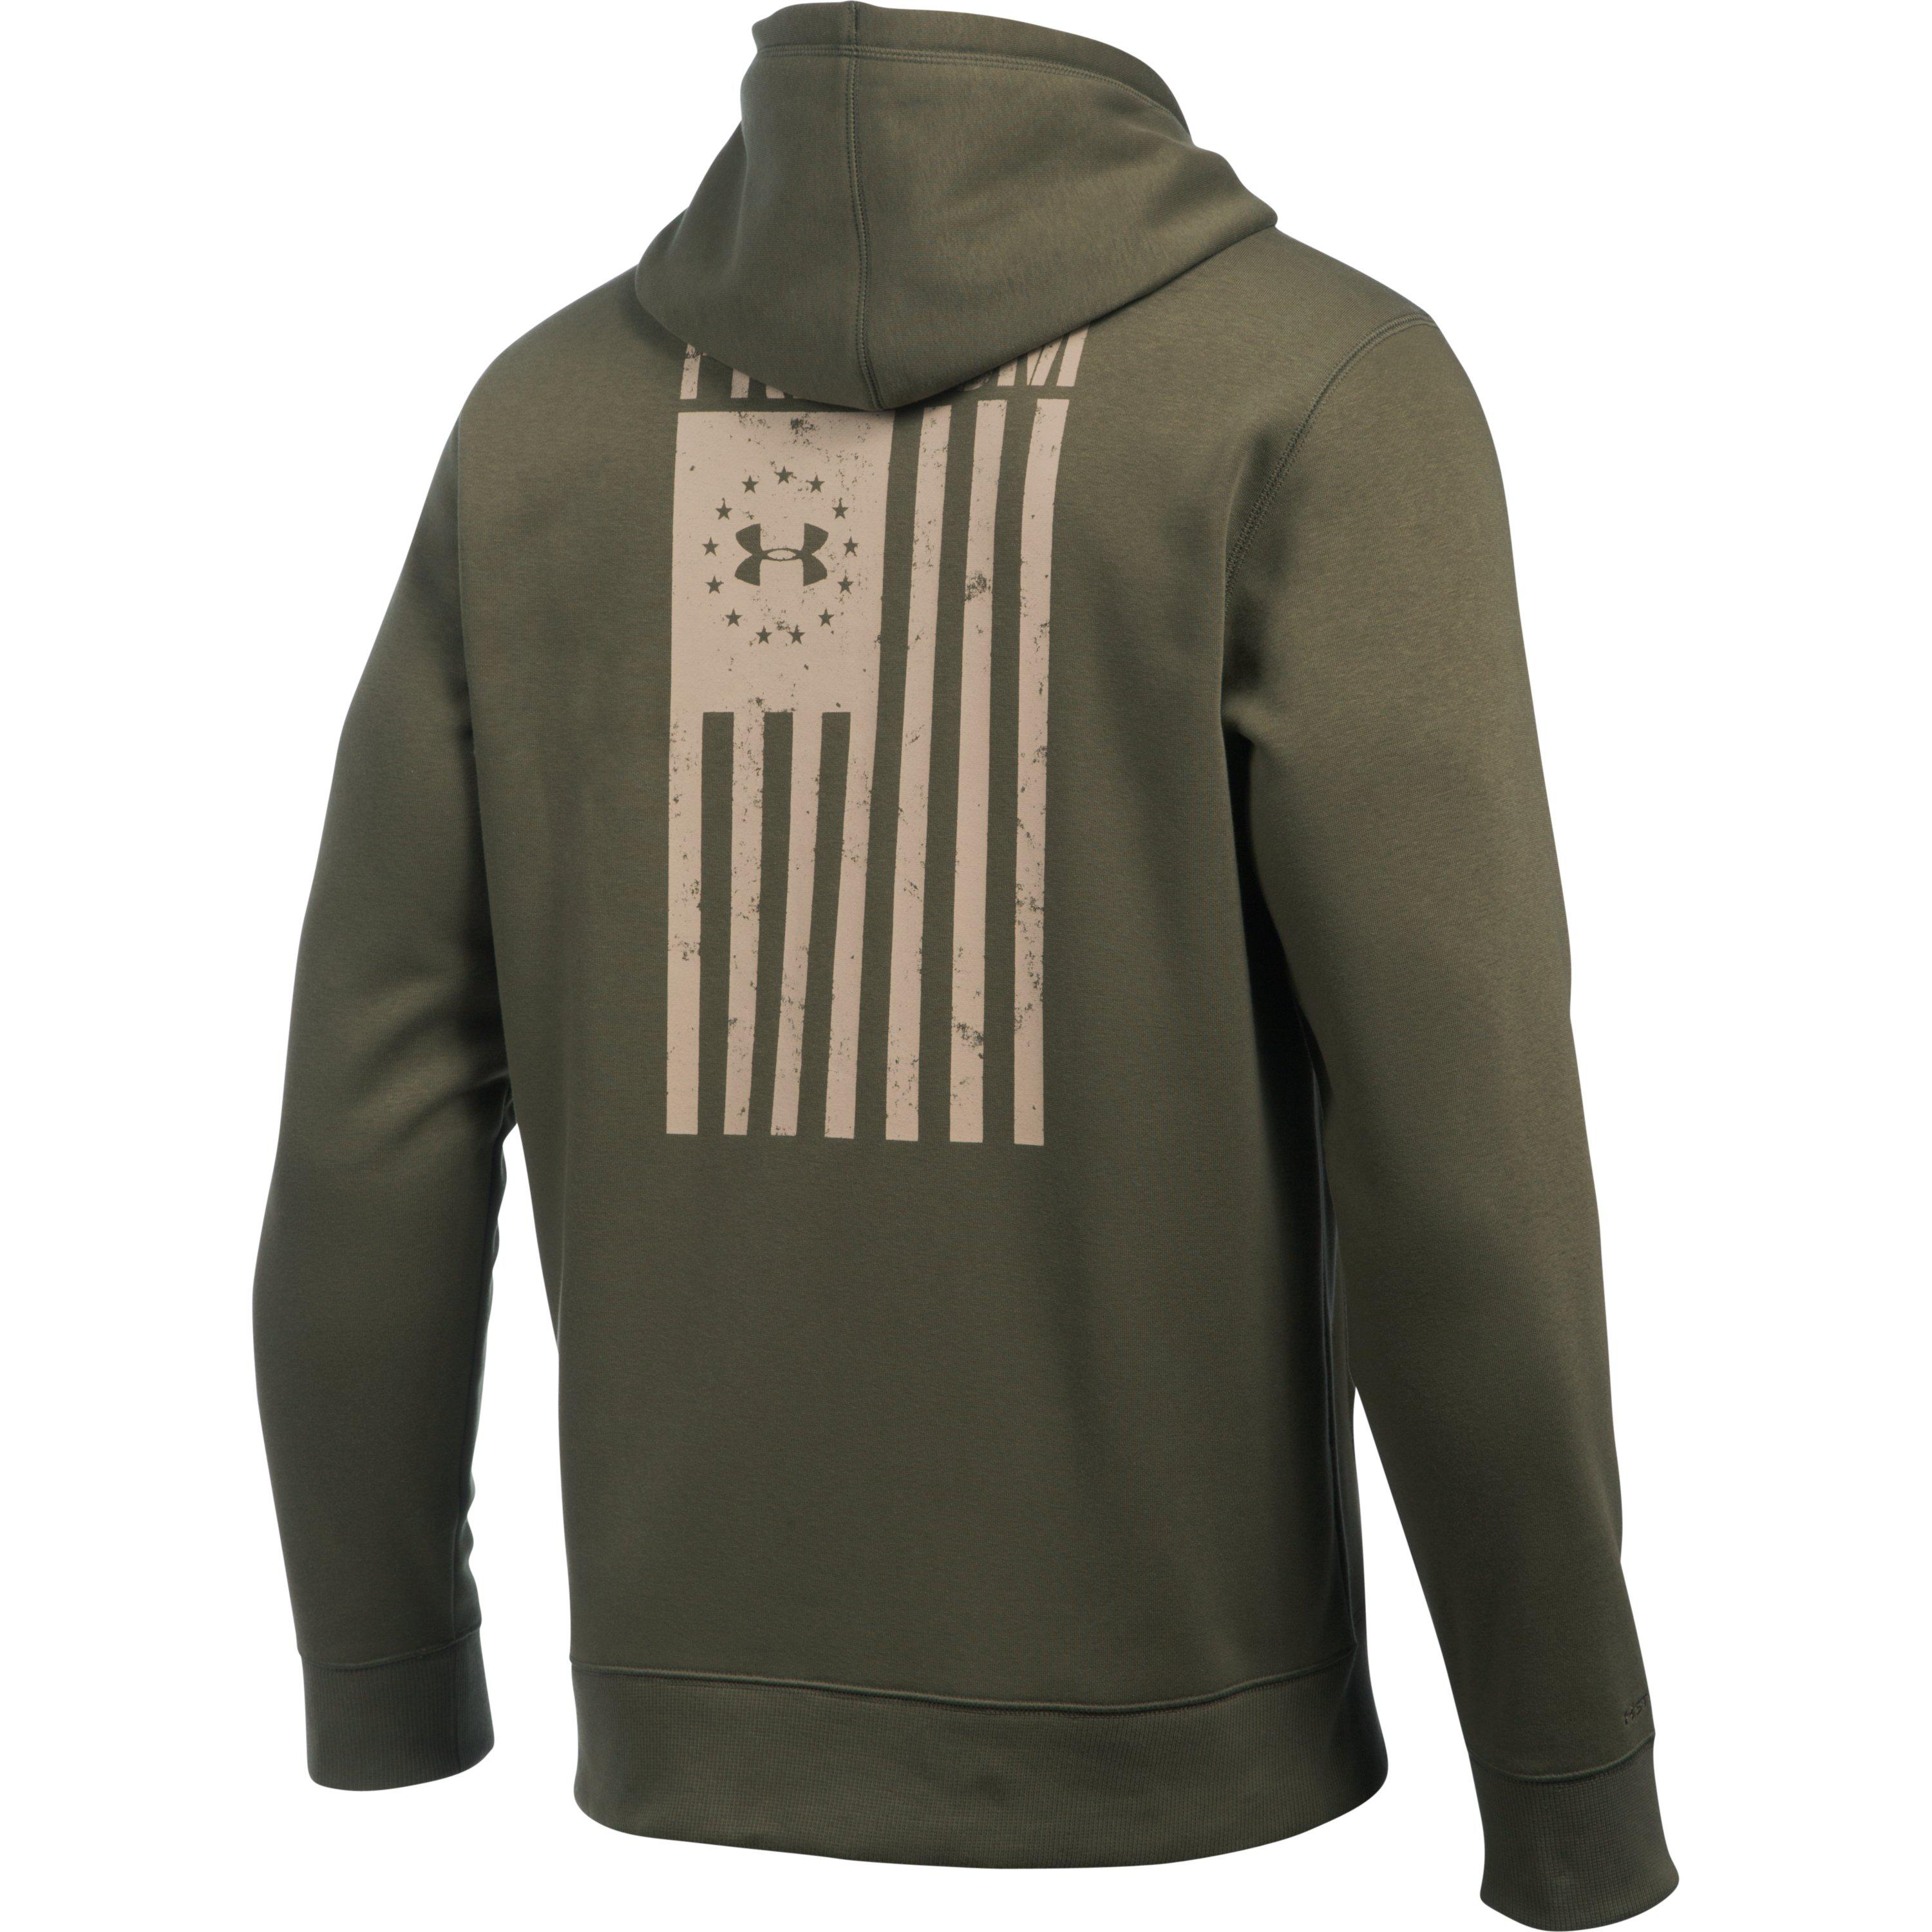 Army Green Under Armour Hoodie - Army Military